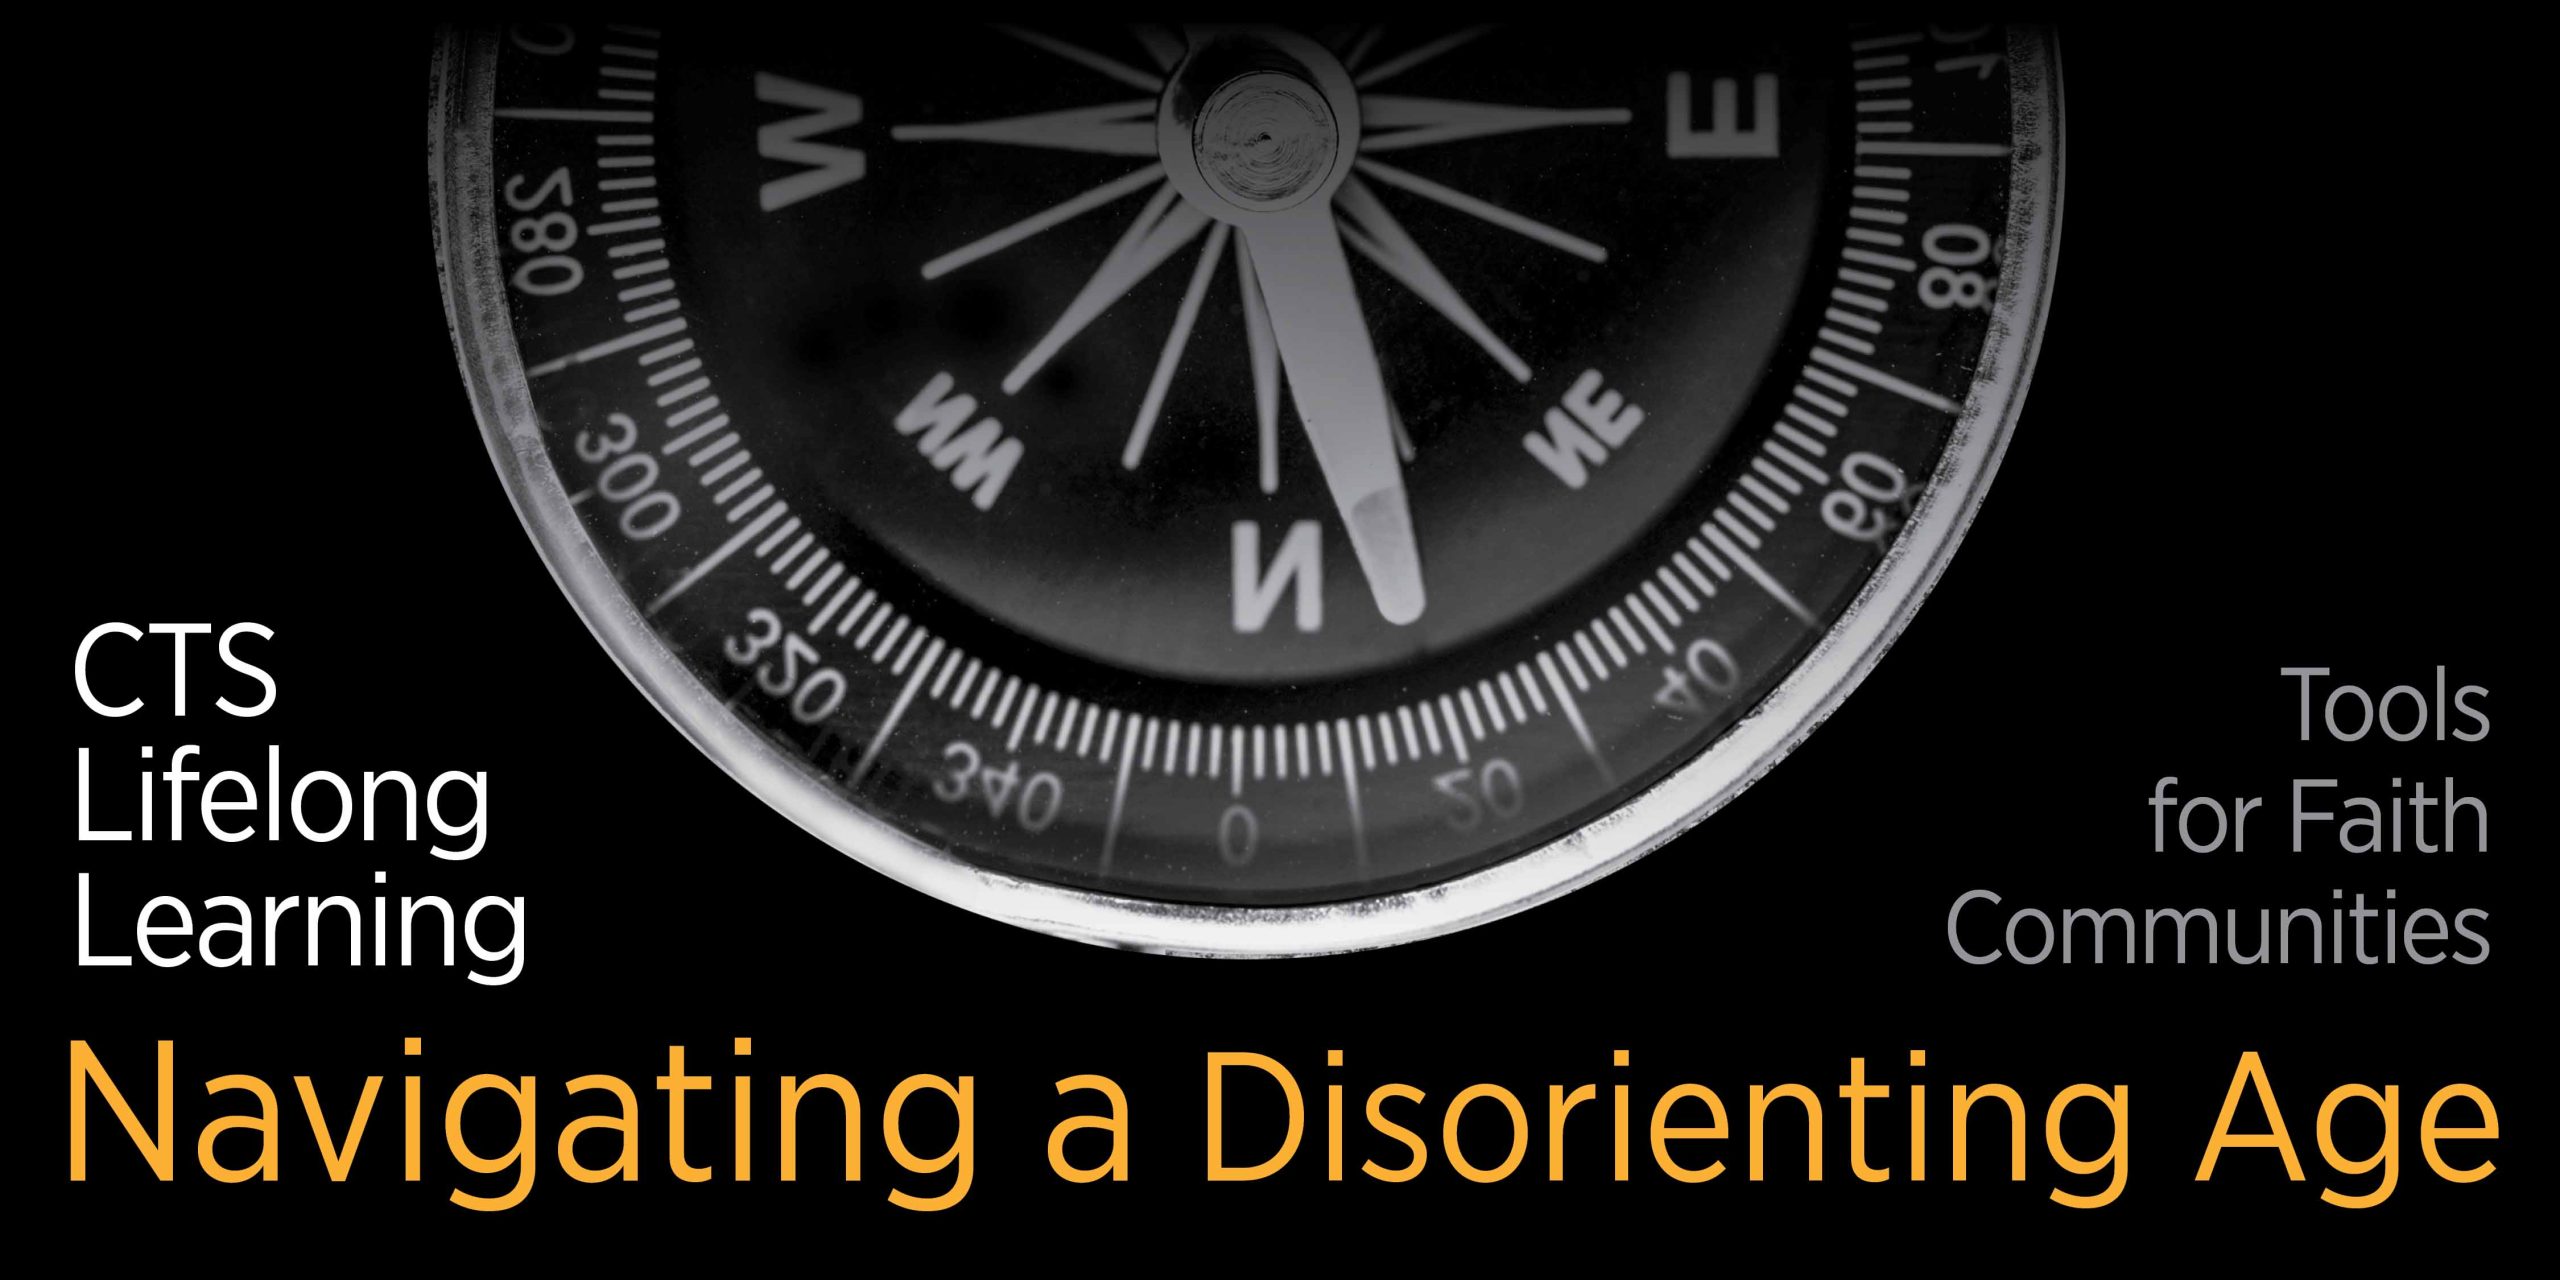 CTS Lifelong Learning - Navigating a Disorienting Age - Tools for Faith Communities